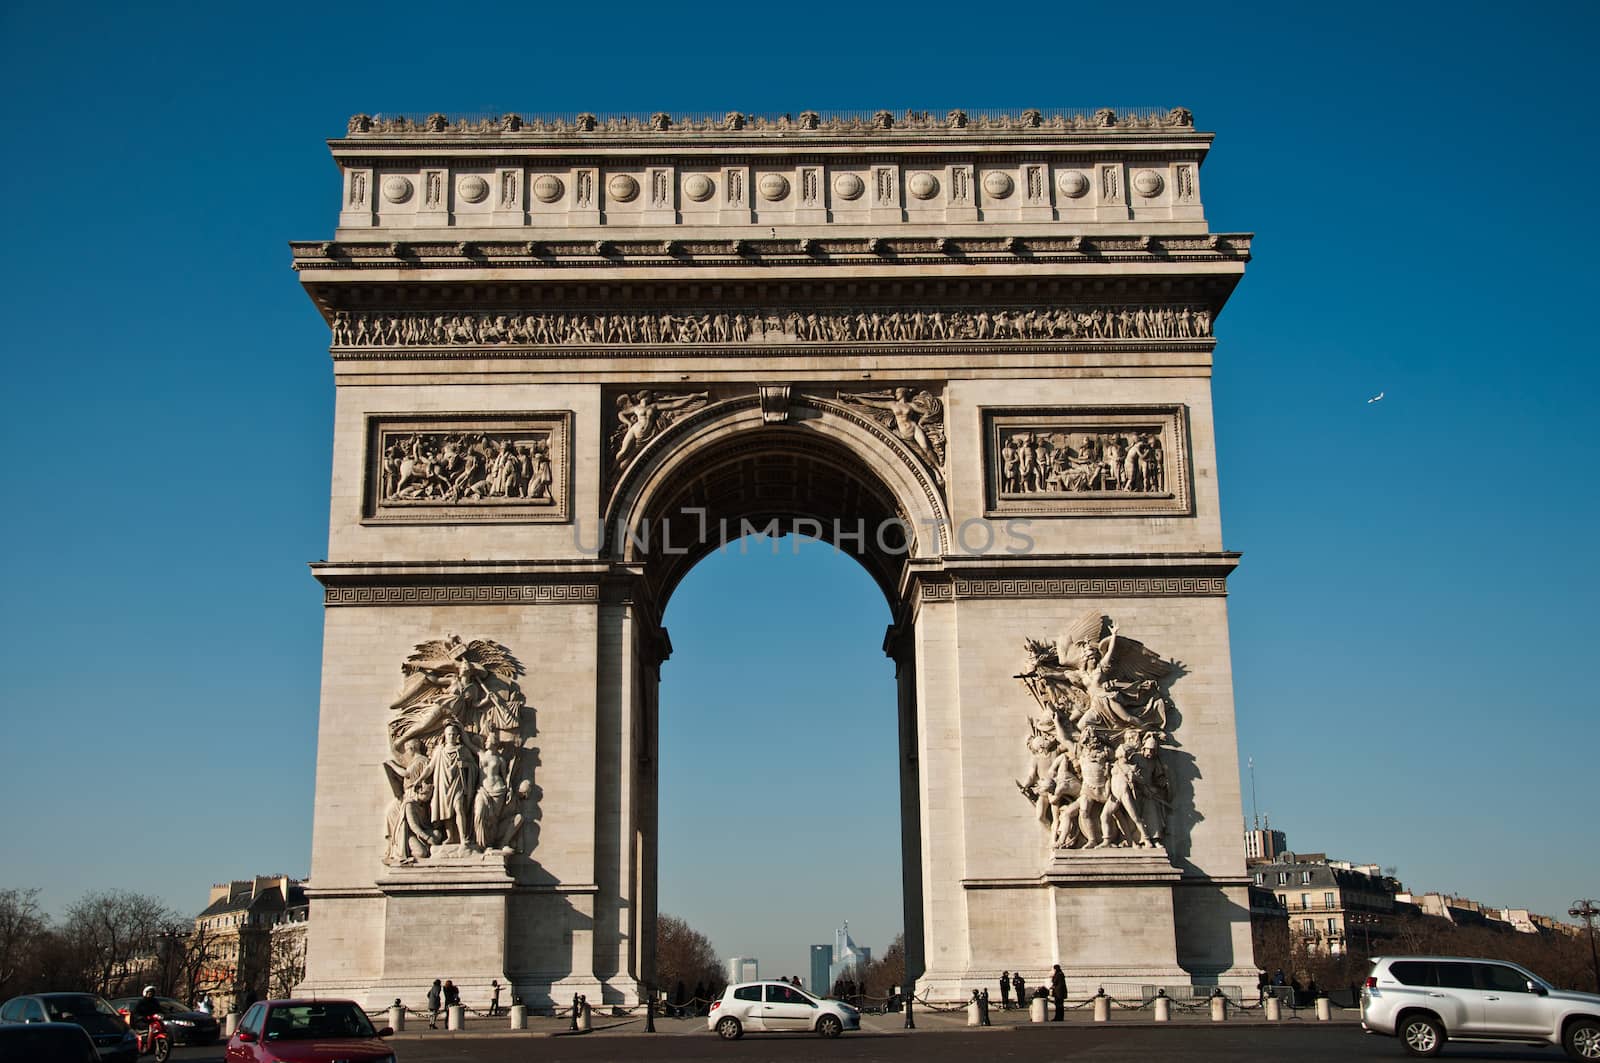 Arch of Triumph in Paris by NeydtStock